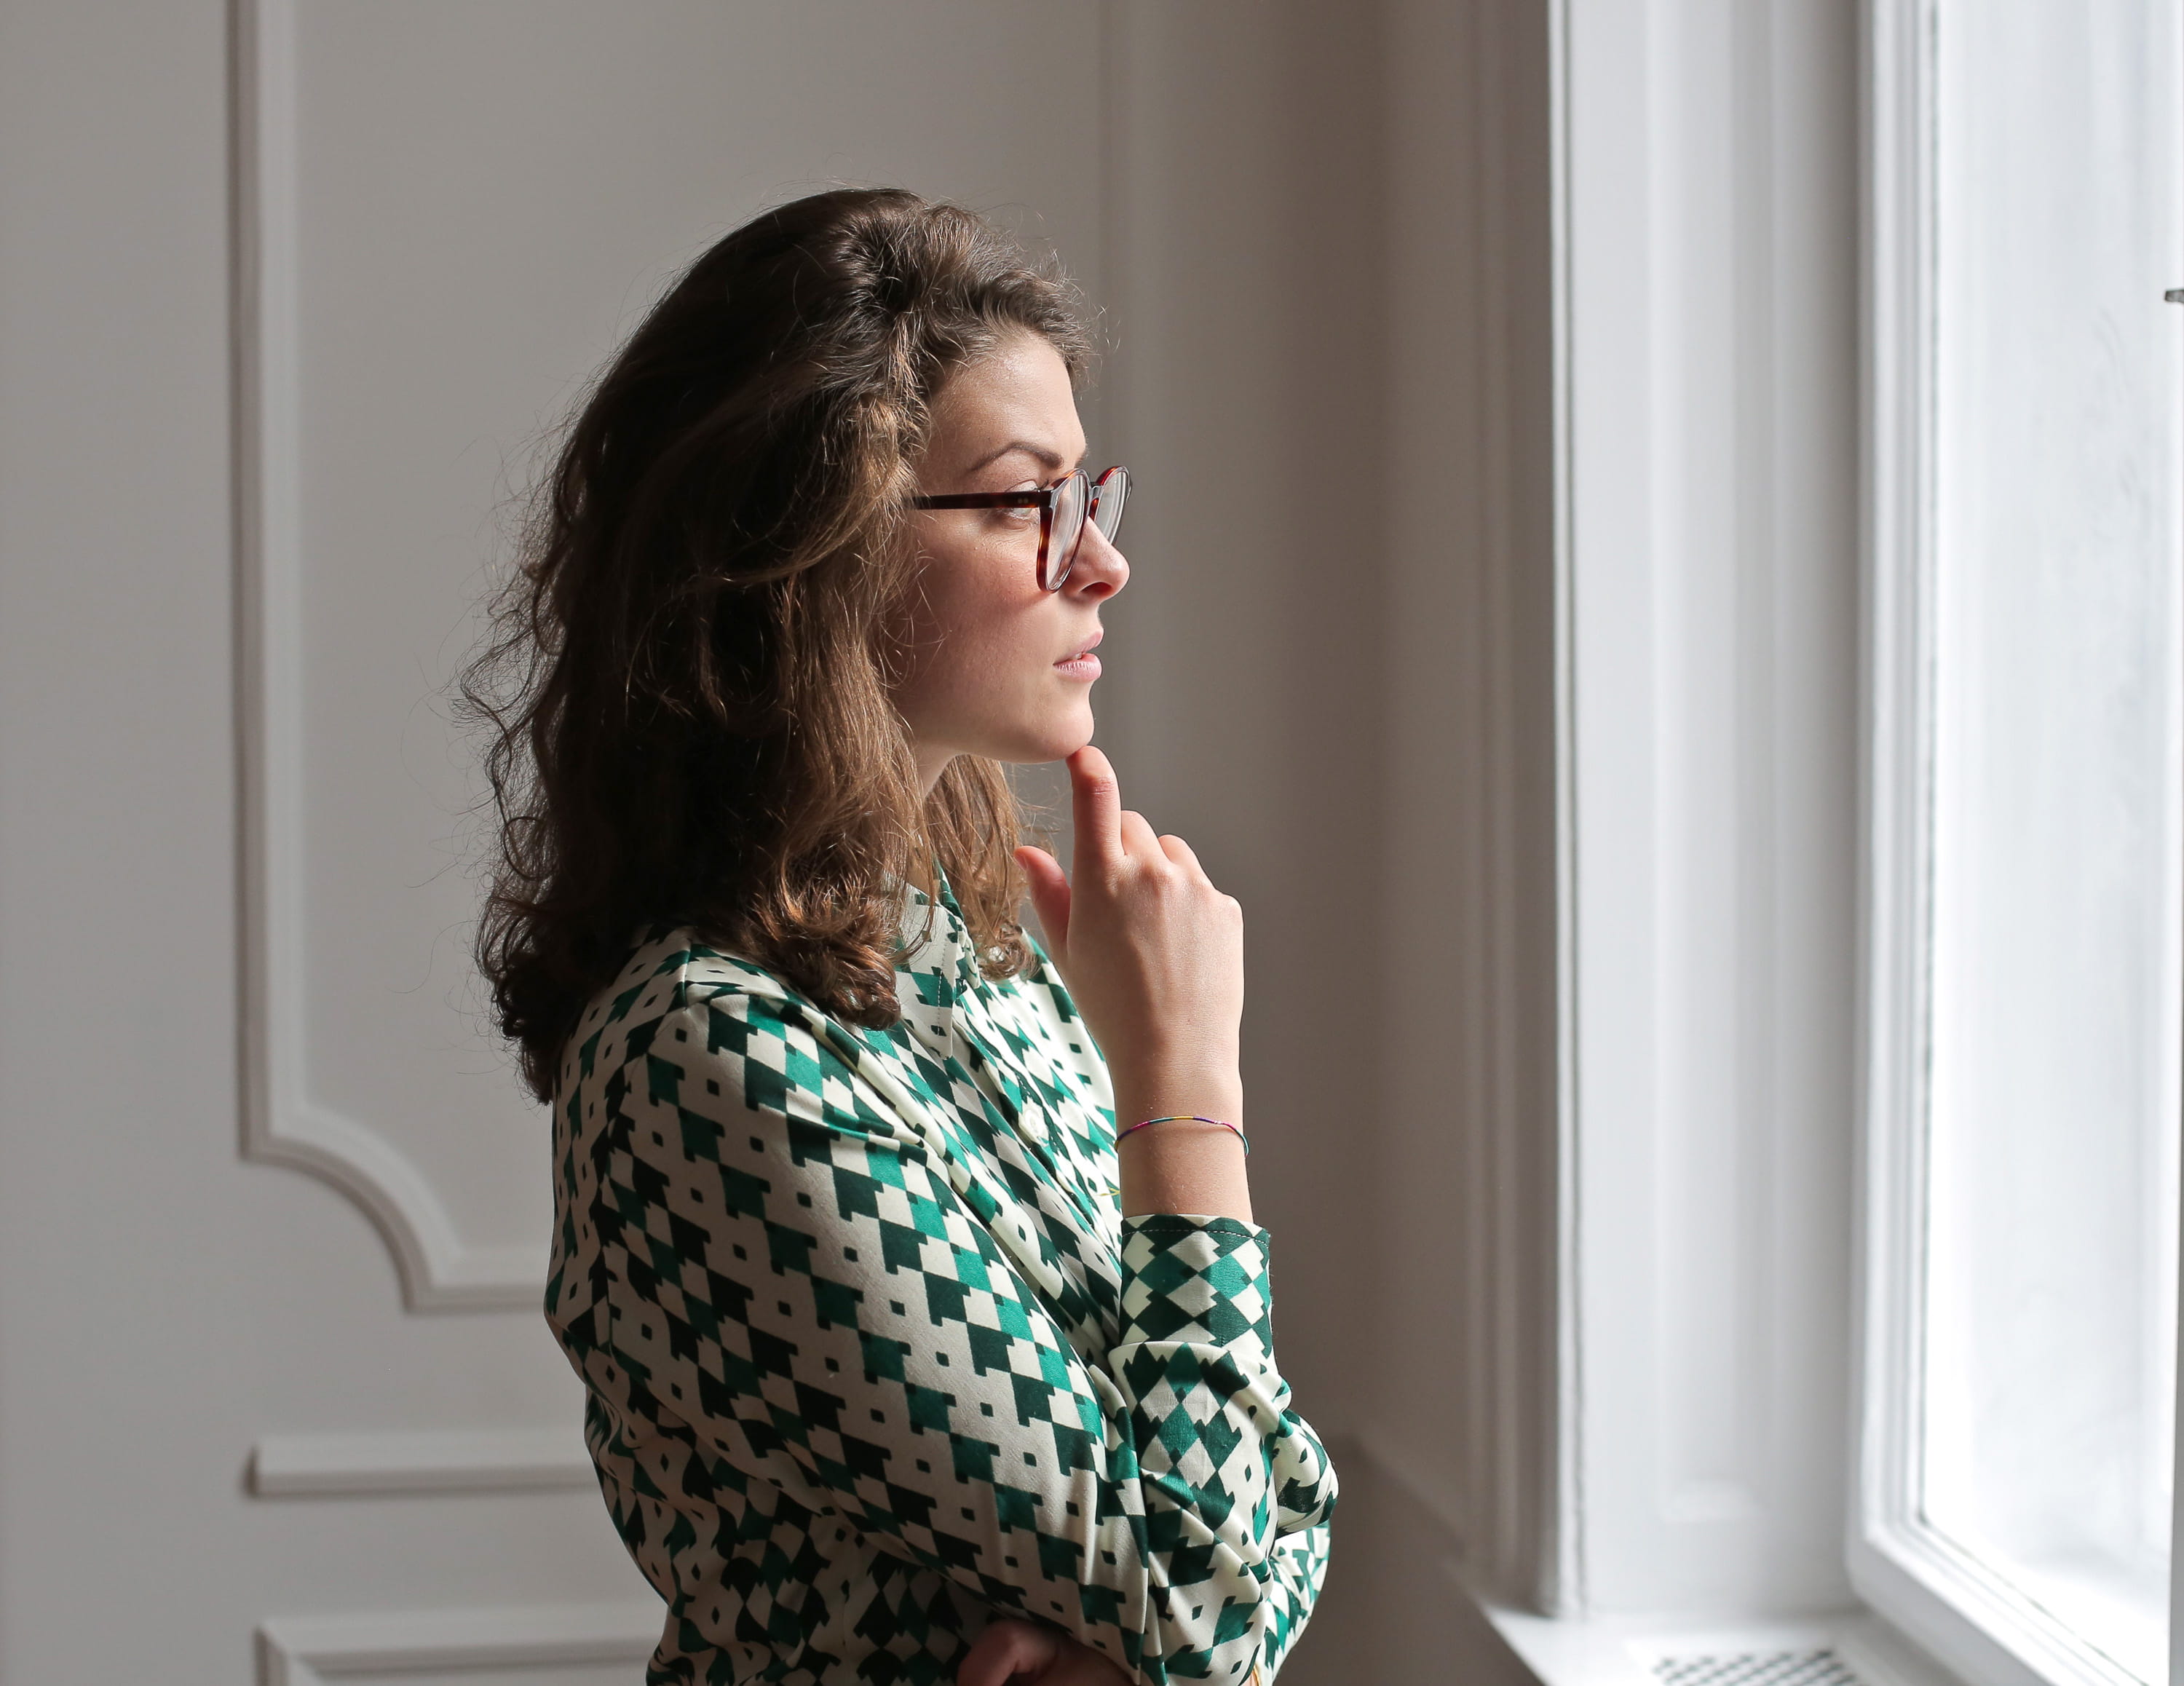 Young woman wearing printed collared shirt and spectacles keeping hand on chin and looking away while standing near window